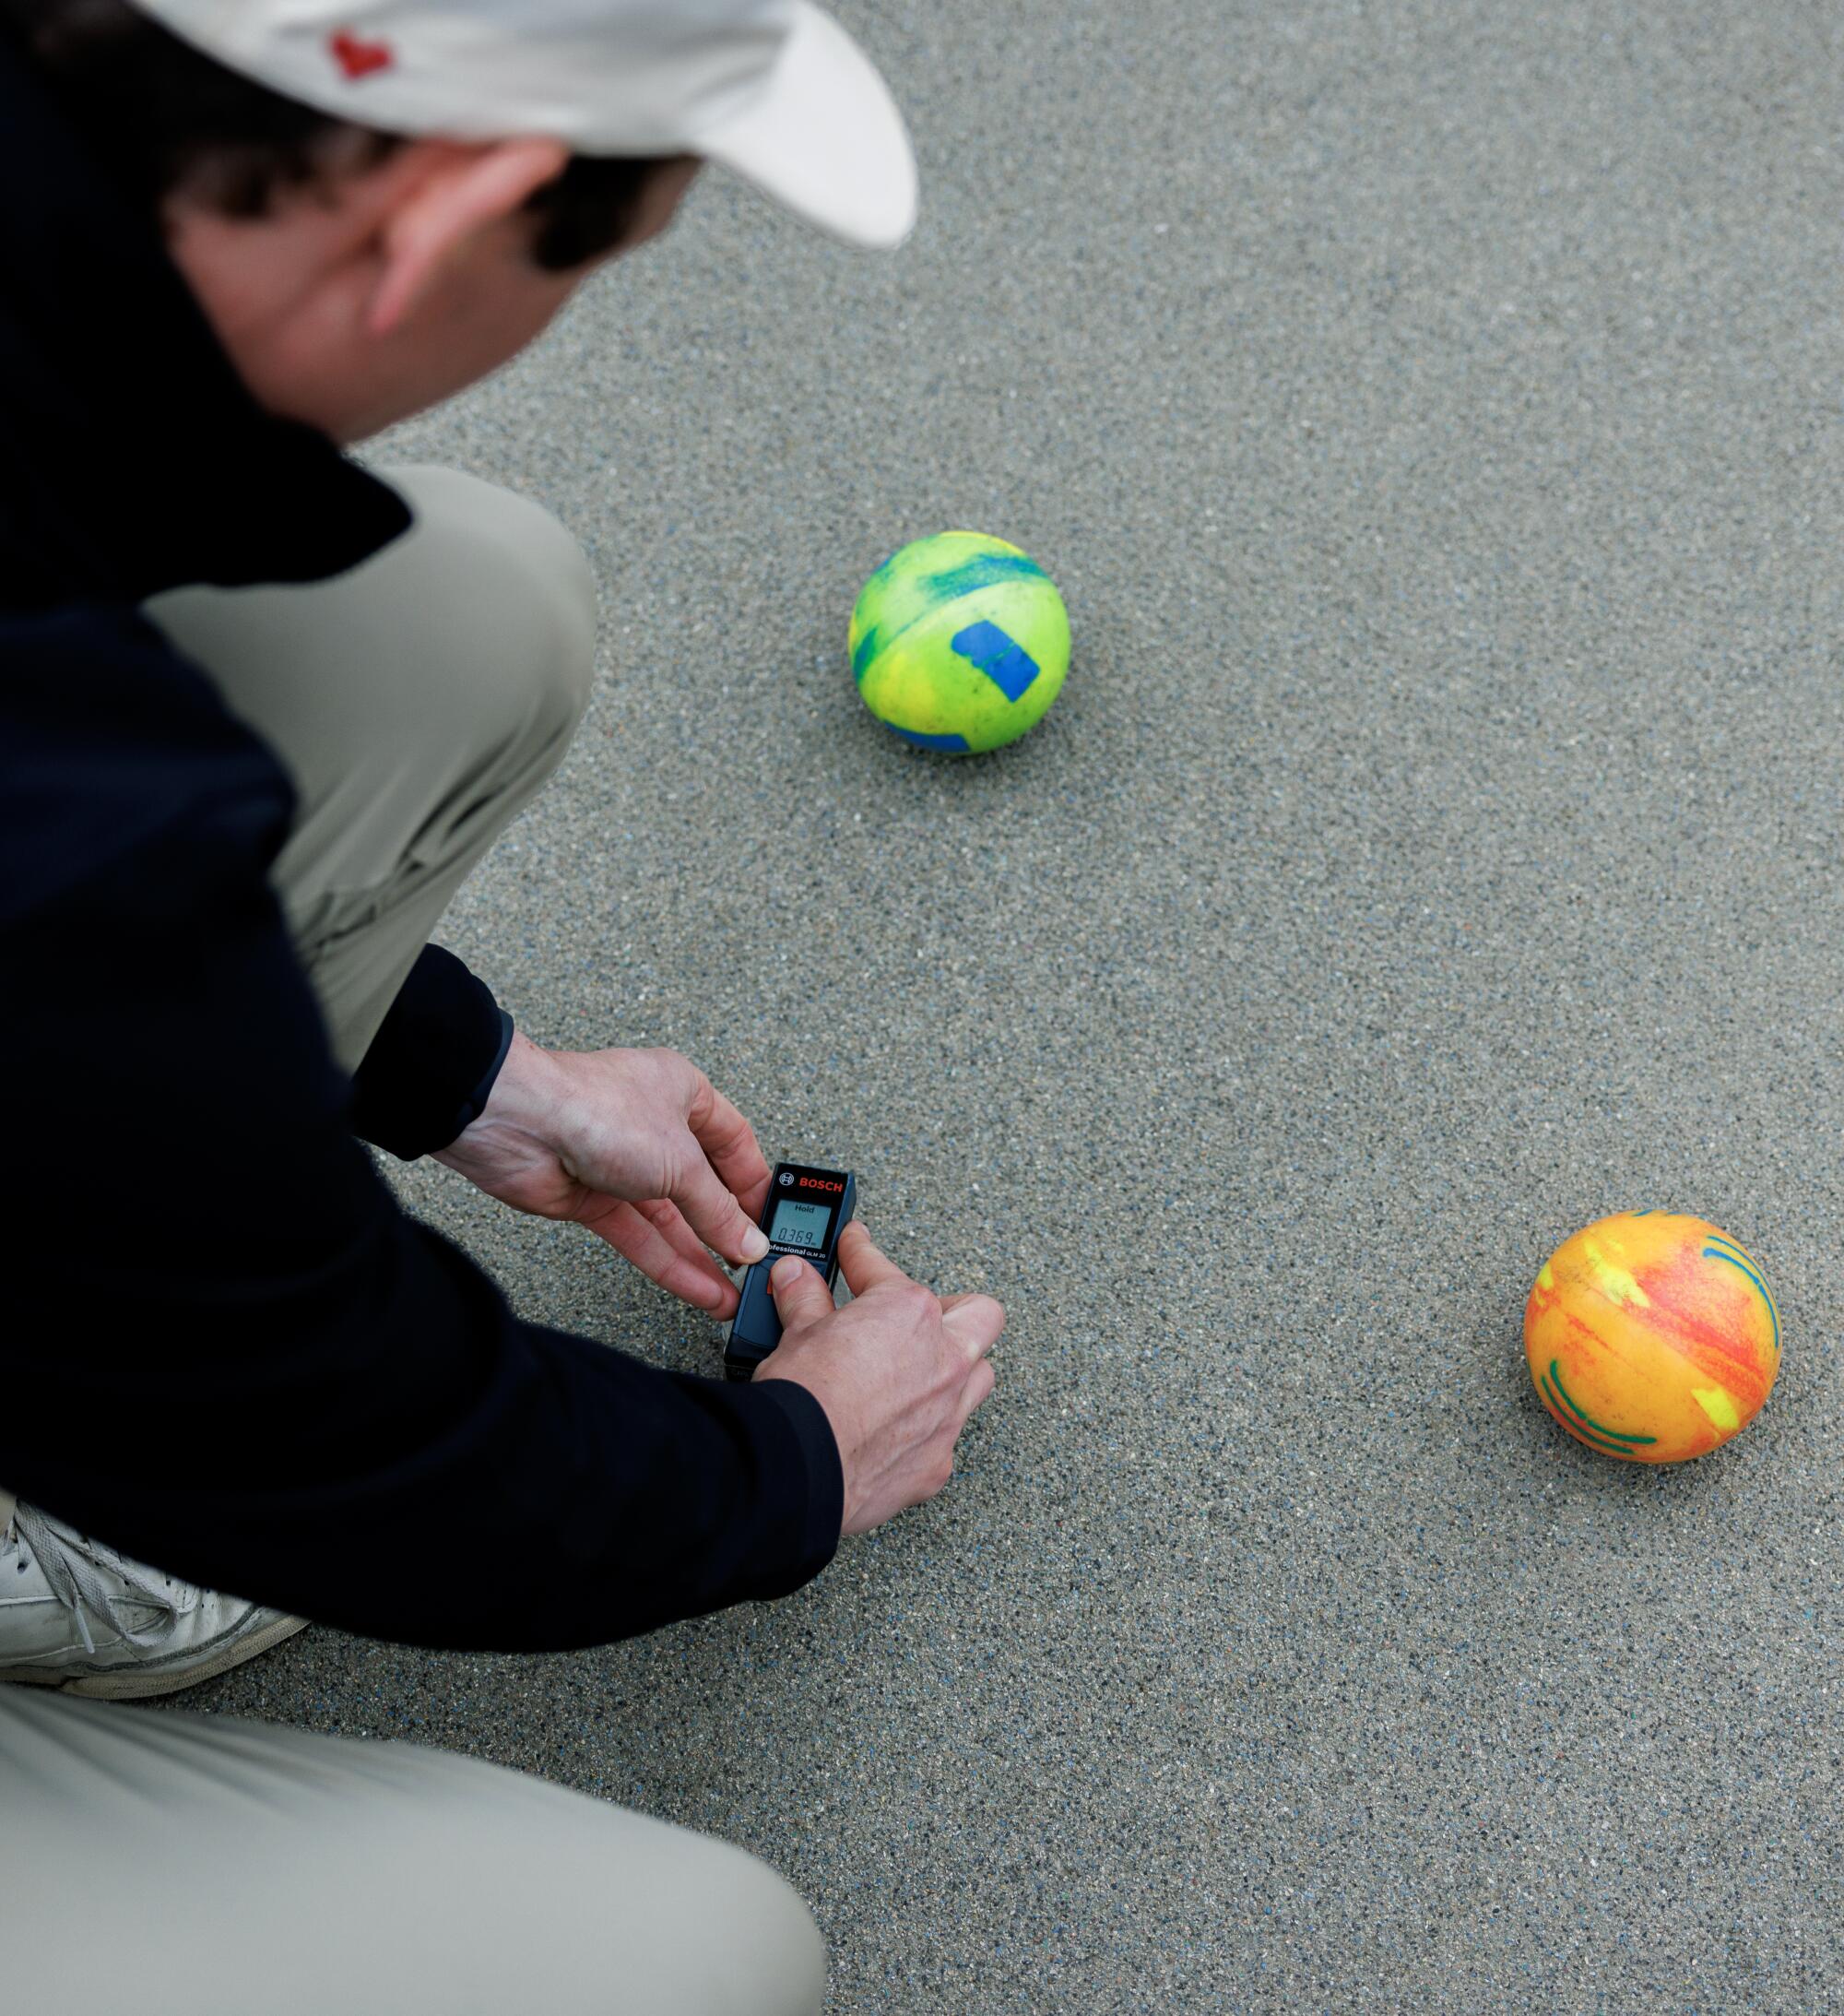 A man uses a digital device to measure the distance between two bocce balls.